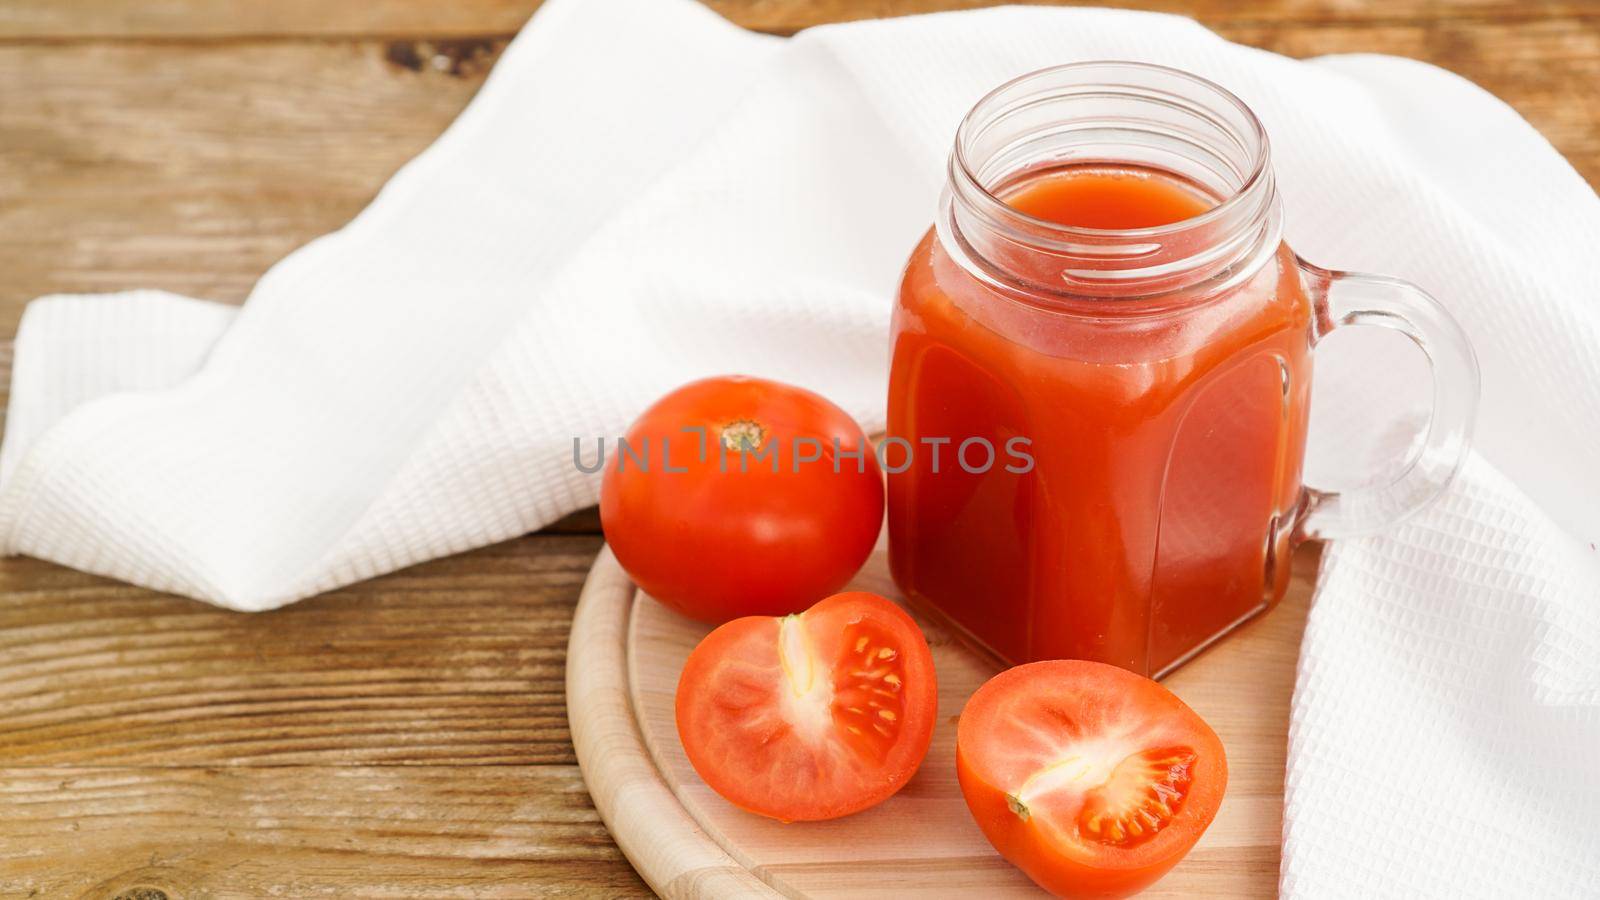 Tomato juice in glass jar and fresh tomatoes on wooden cutting board and white towel